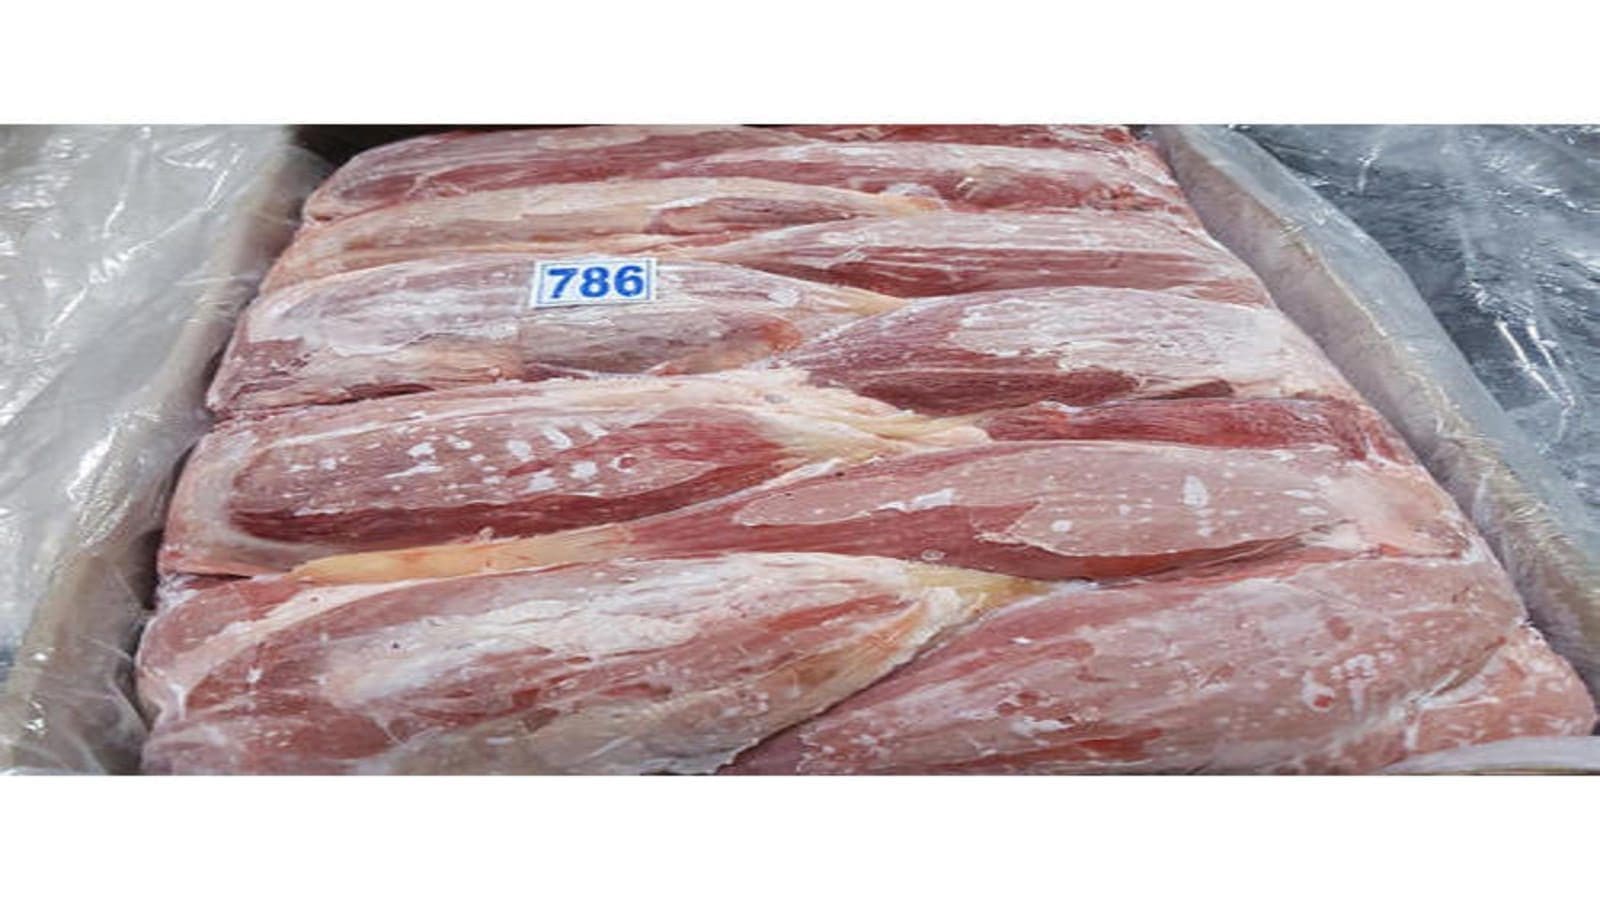 China’s anti-triad unit nabs 1700 tonnes smuggled frozen meat